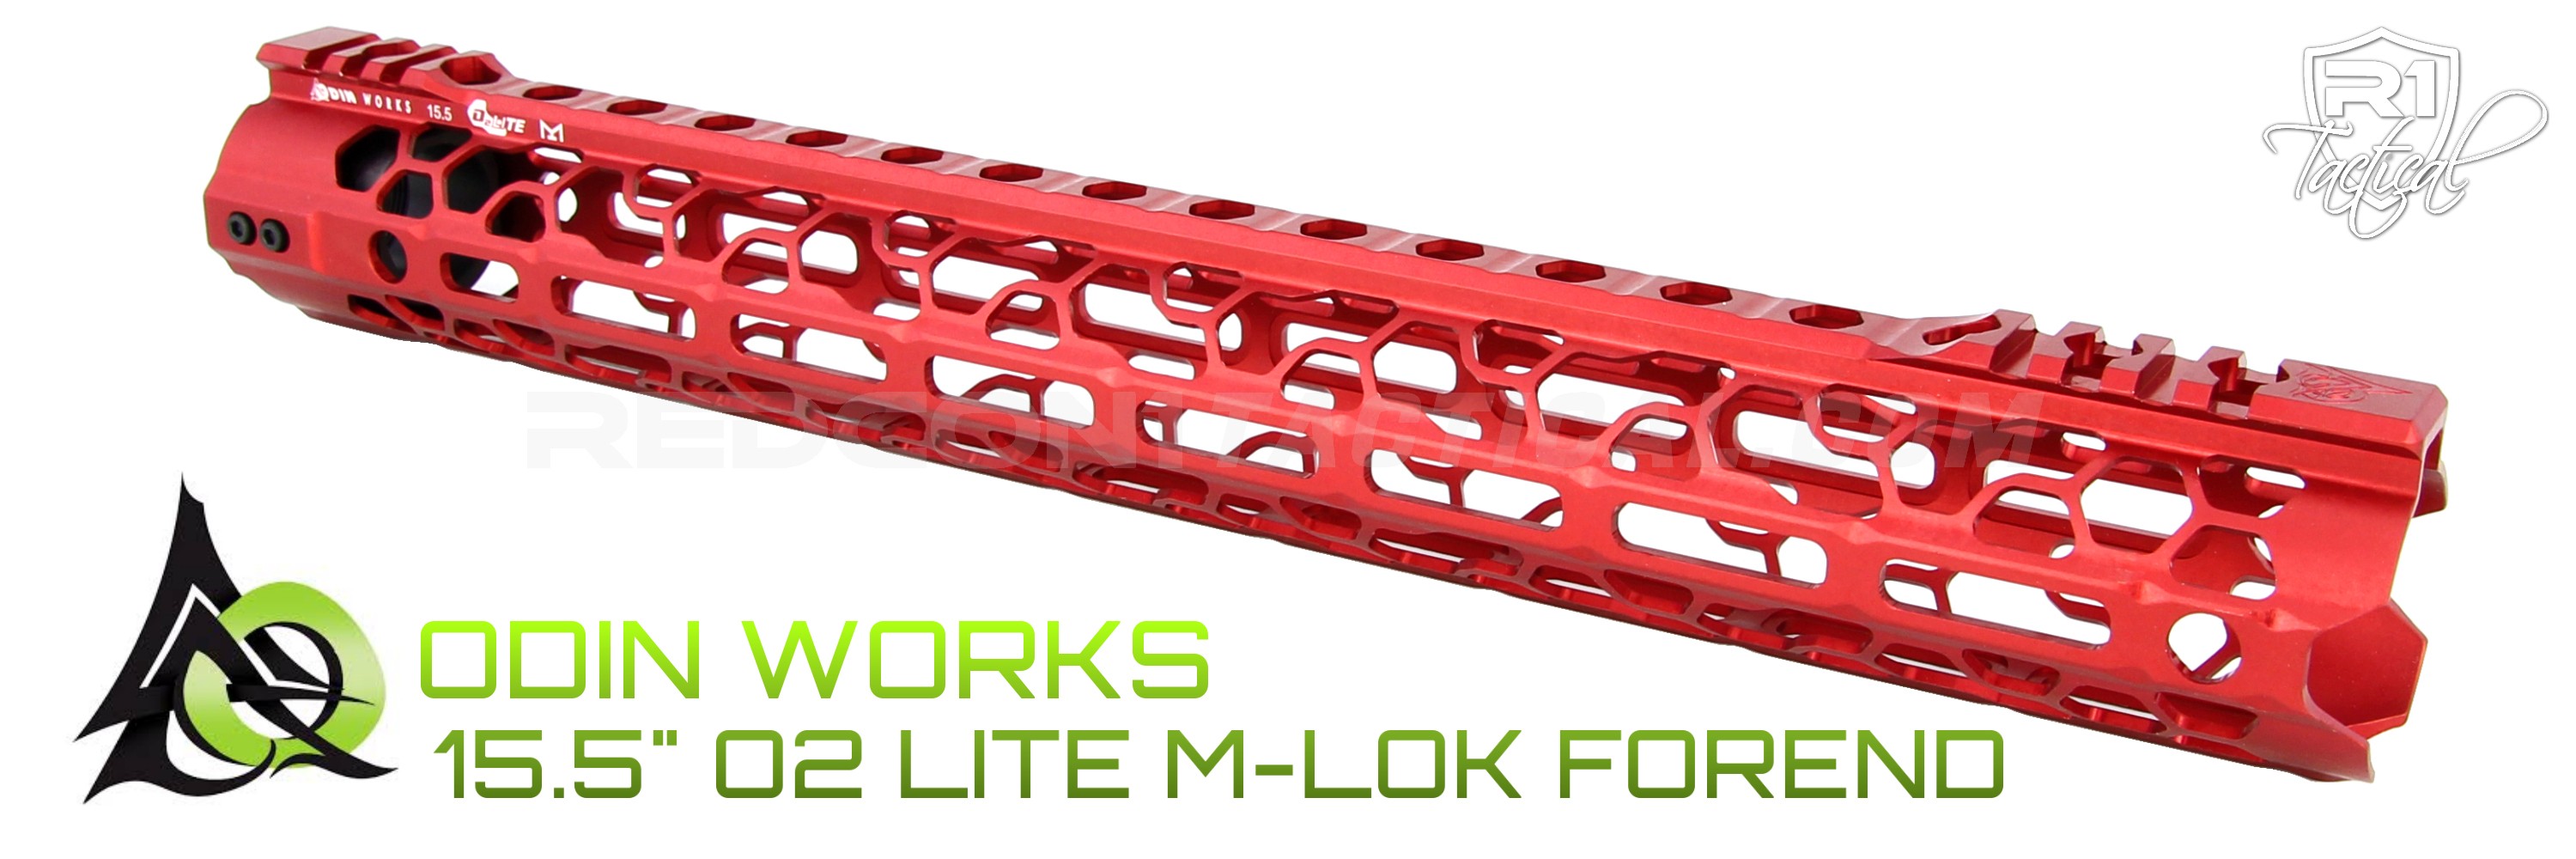 ODIN Works 15.5 O2 Lite M-LOK Forend - Red | R1 Tactical